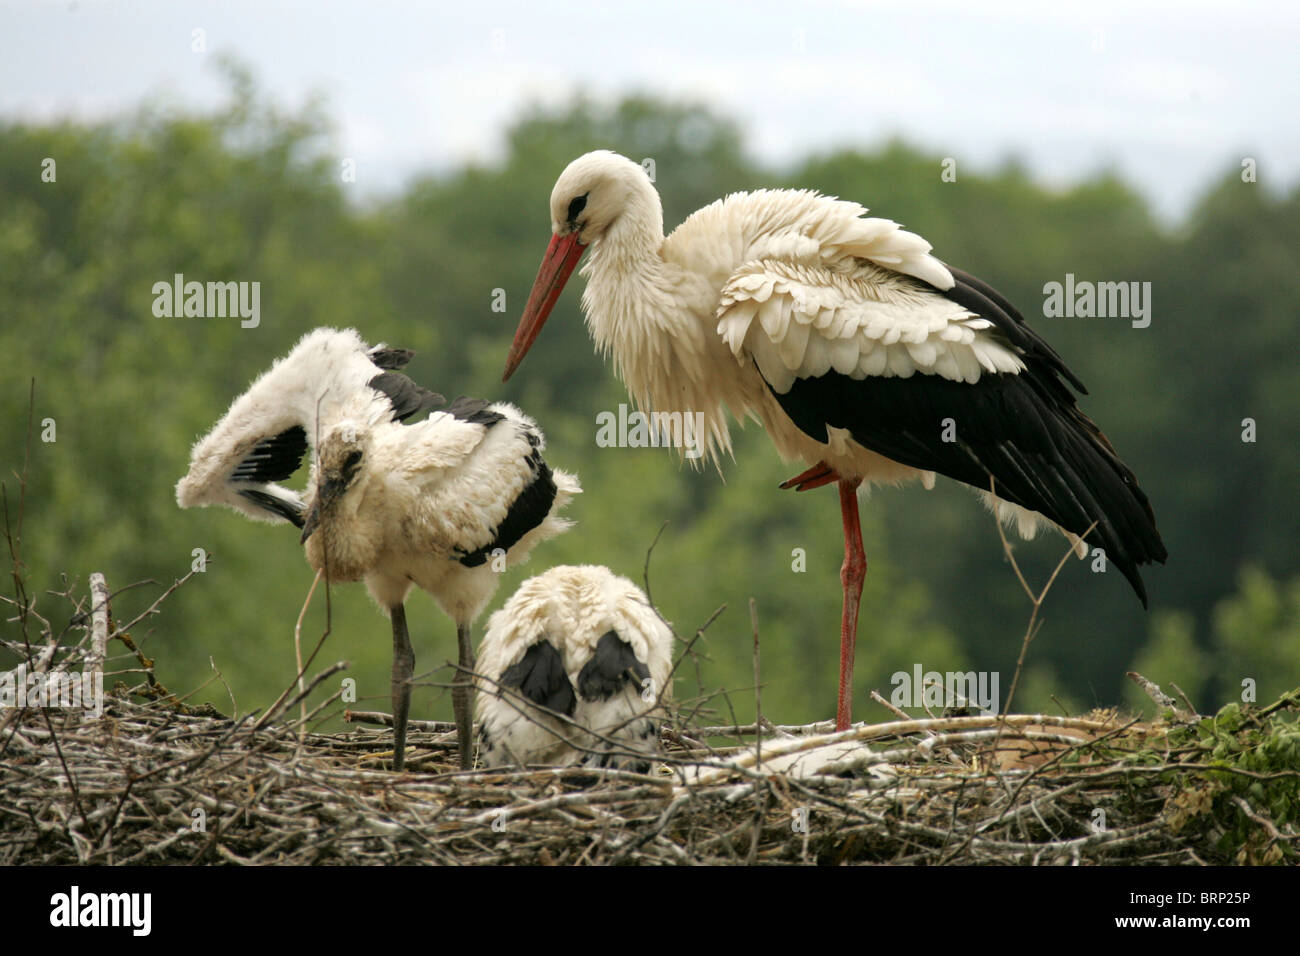 White Stork with two chicks in their nest made of twigs Stock Photo